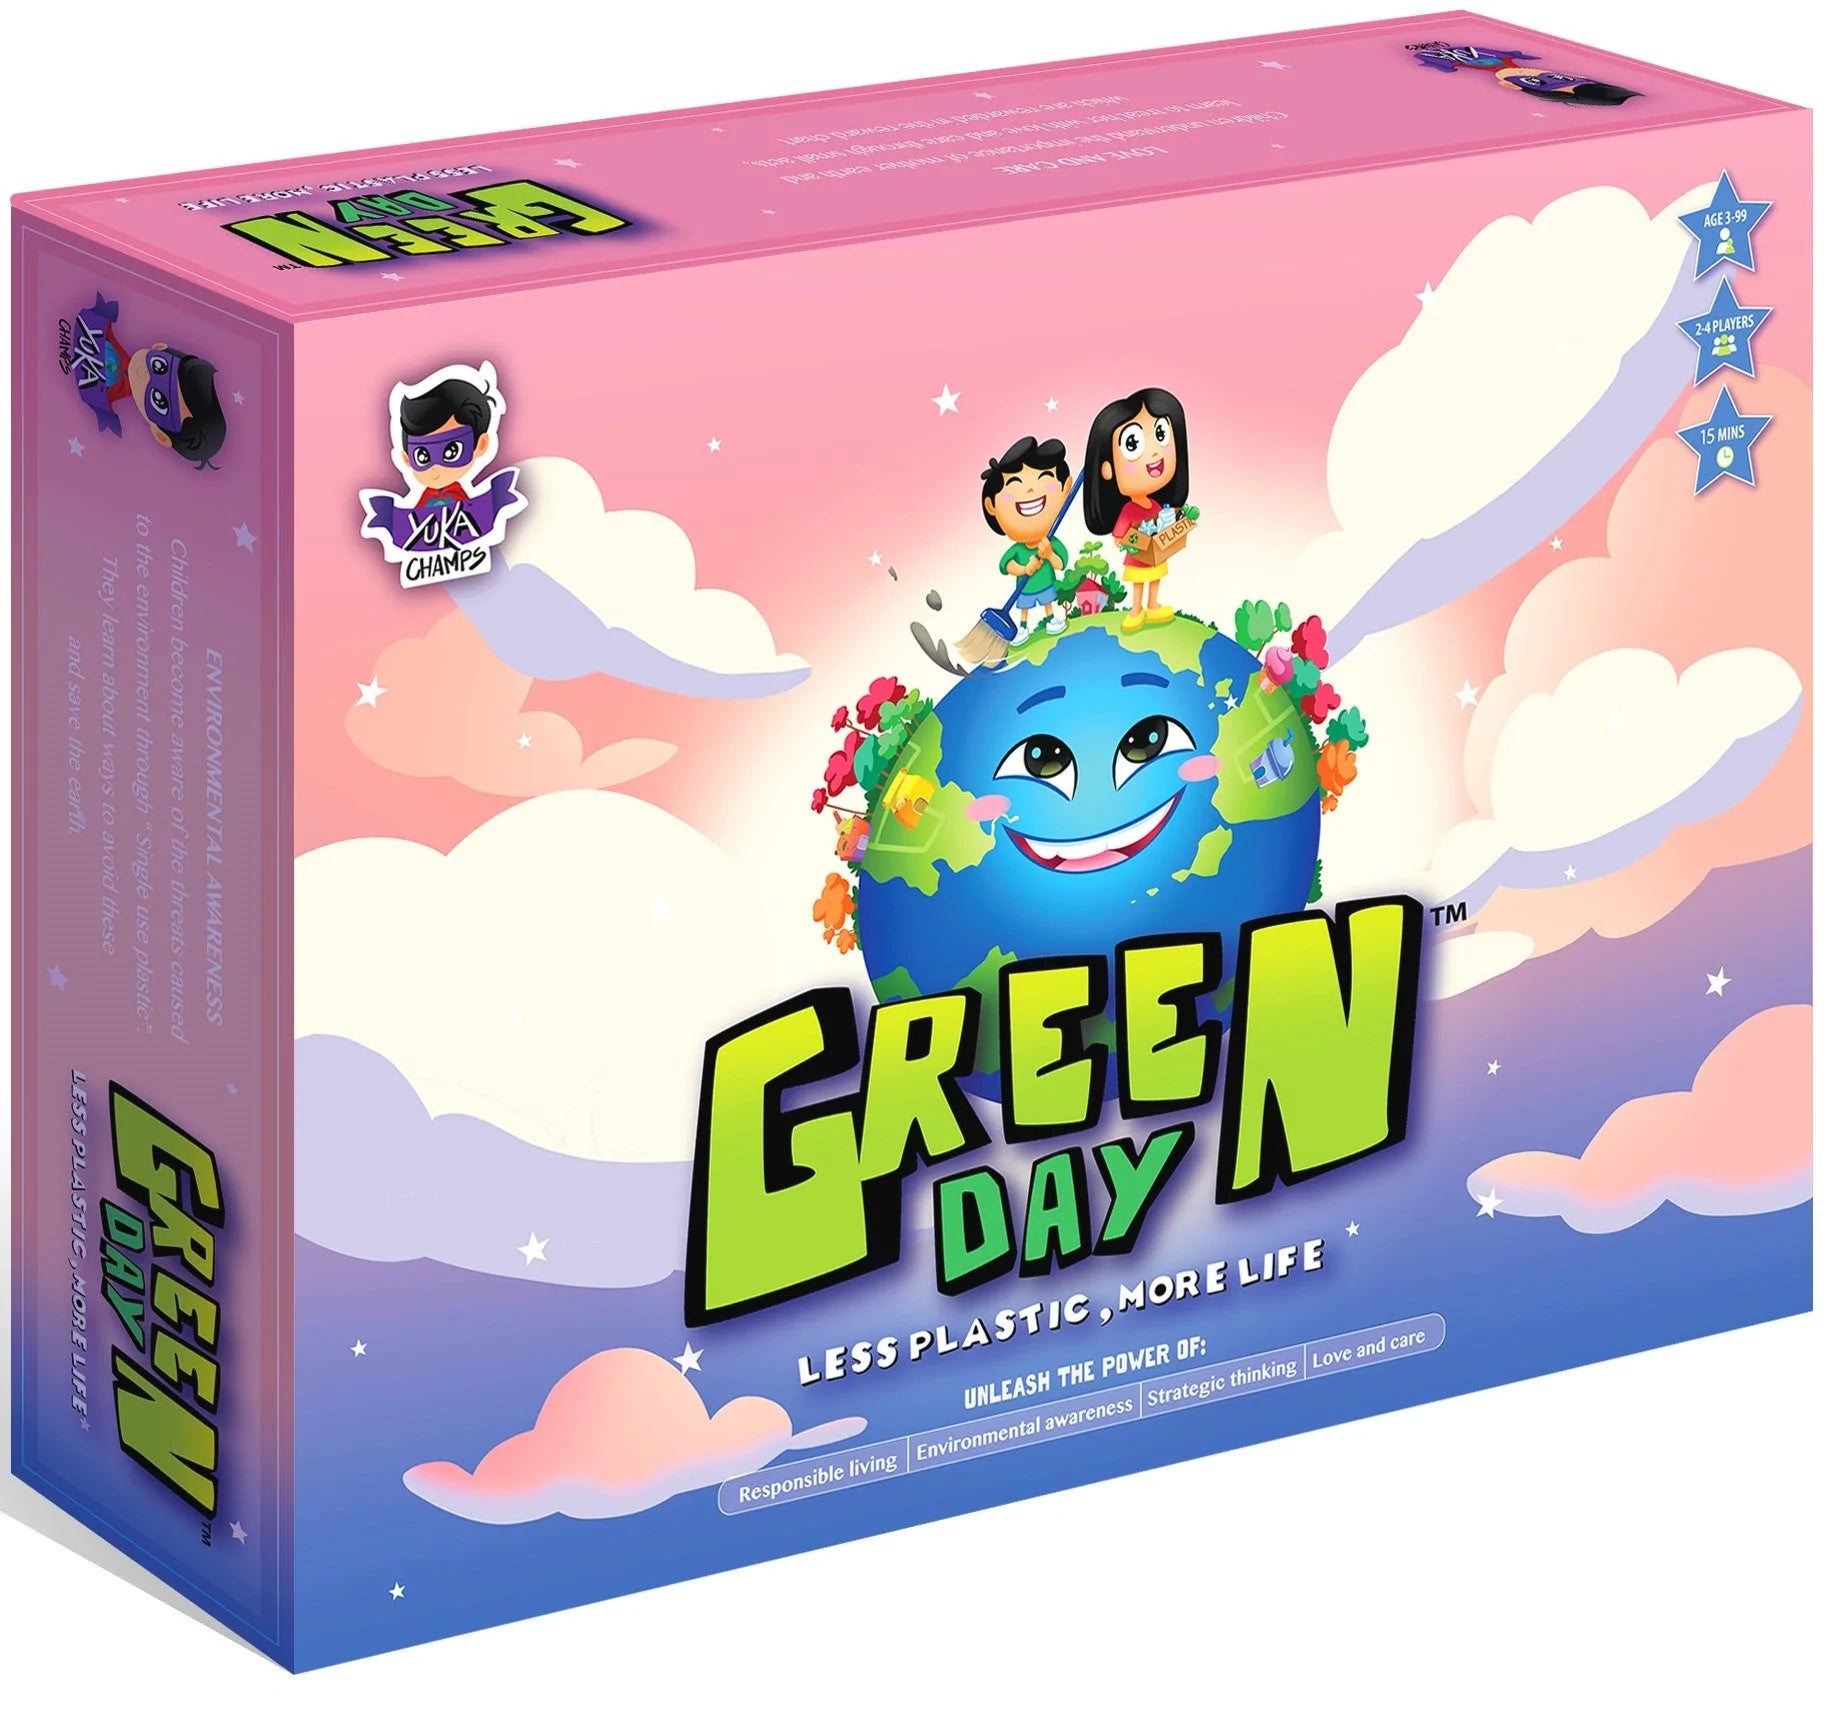 Buy Green Day - Less Plastic More Life Board GameBuy Do You See Me - 2 Flashcards Game - SkilloToys.com